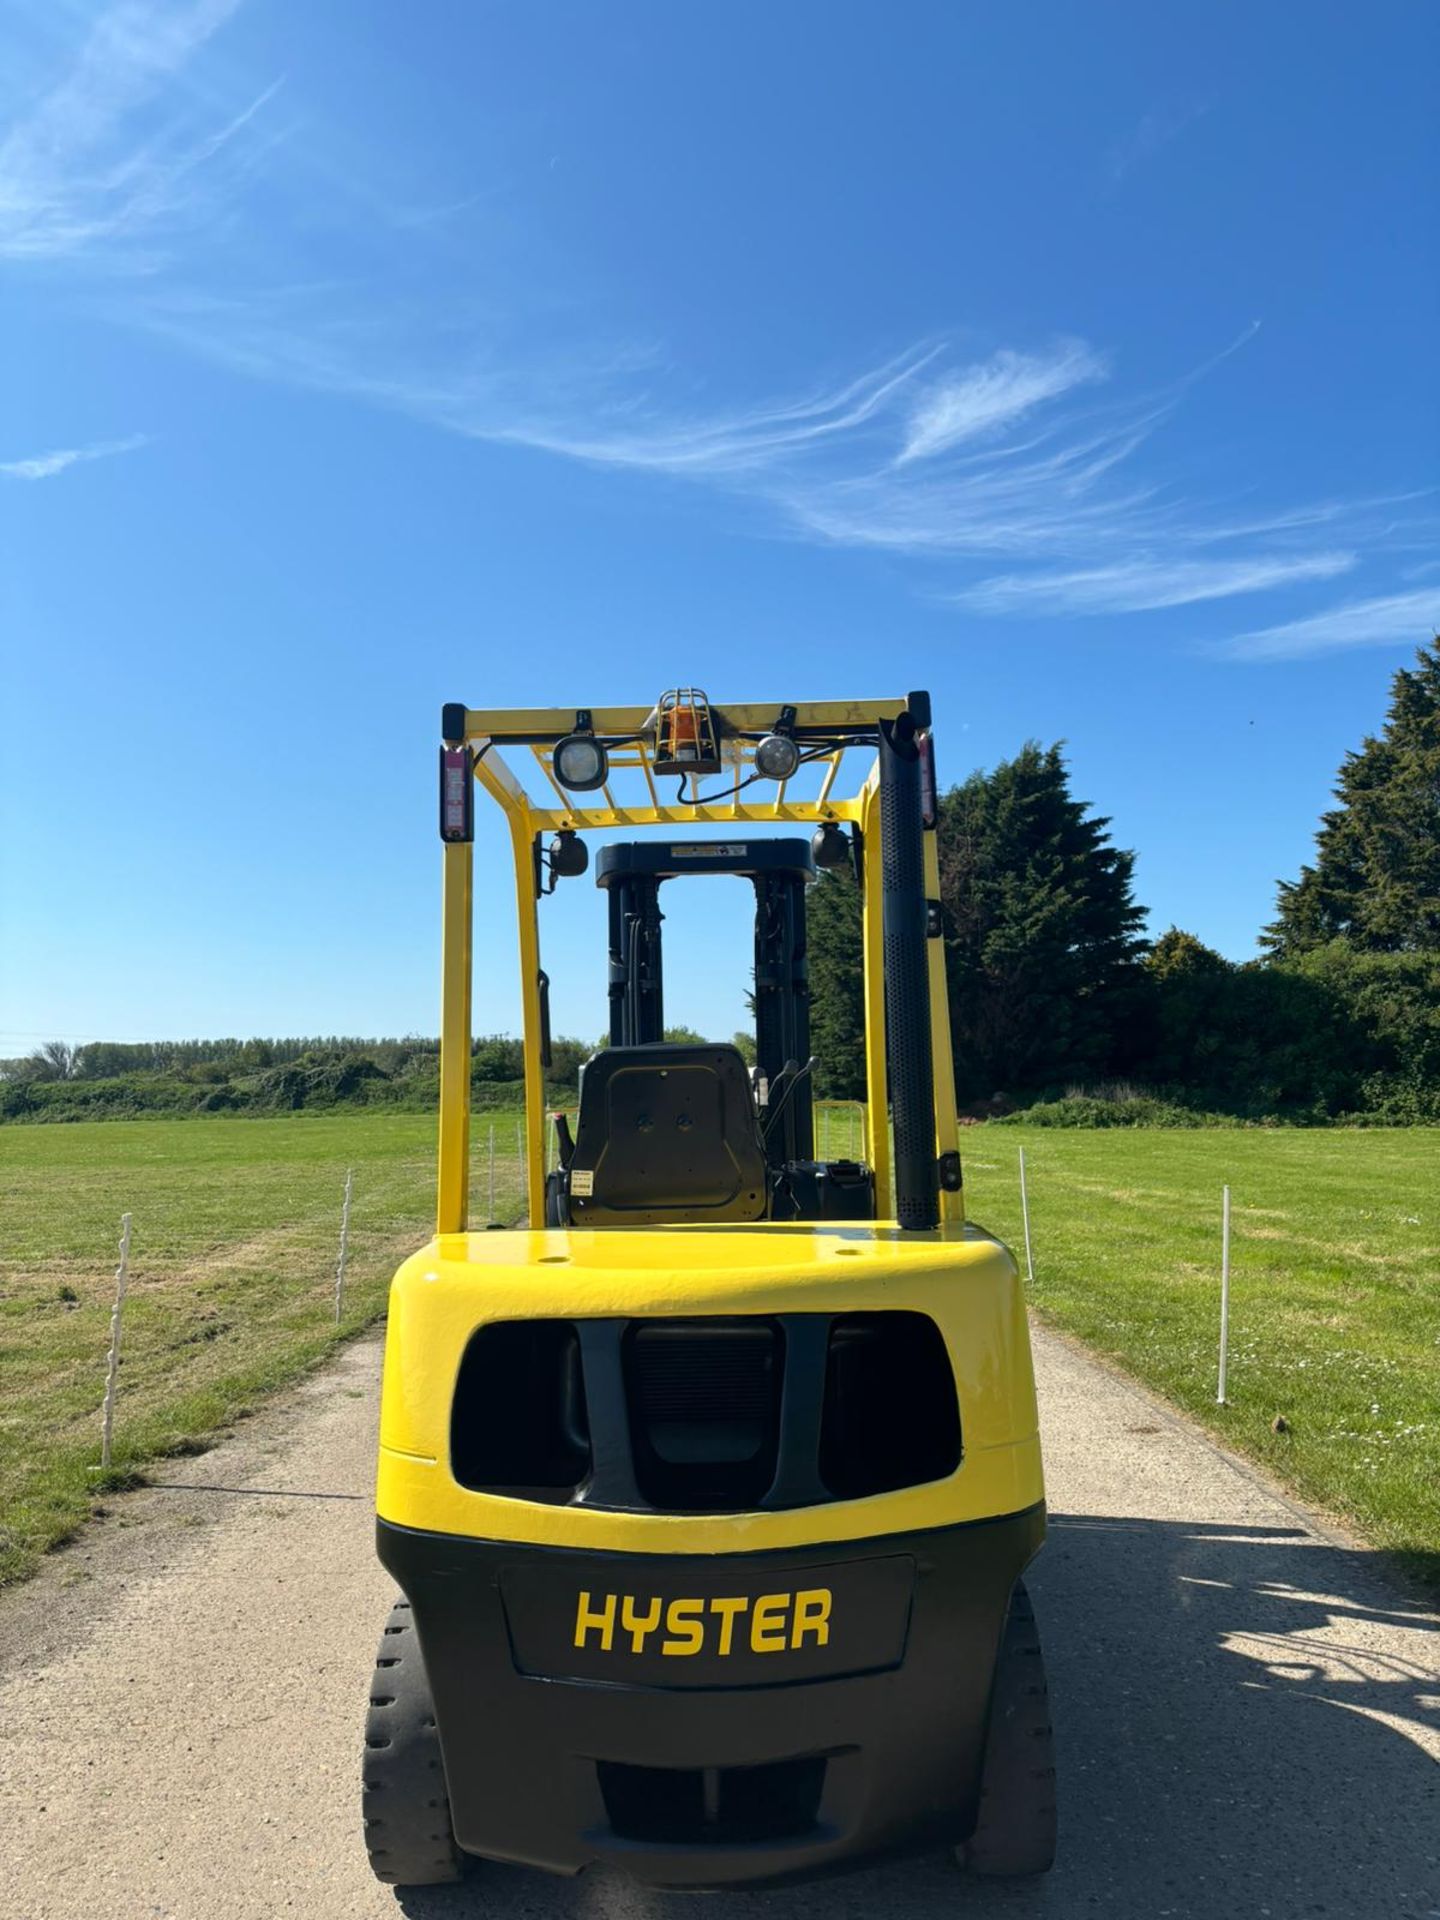 2018, HYSTER - Forklift Truck - Image 4 of 9